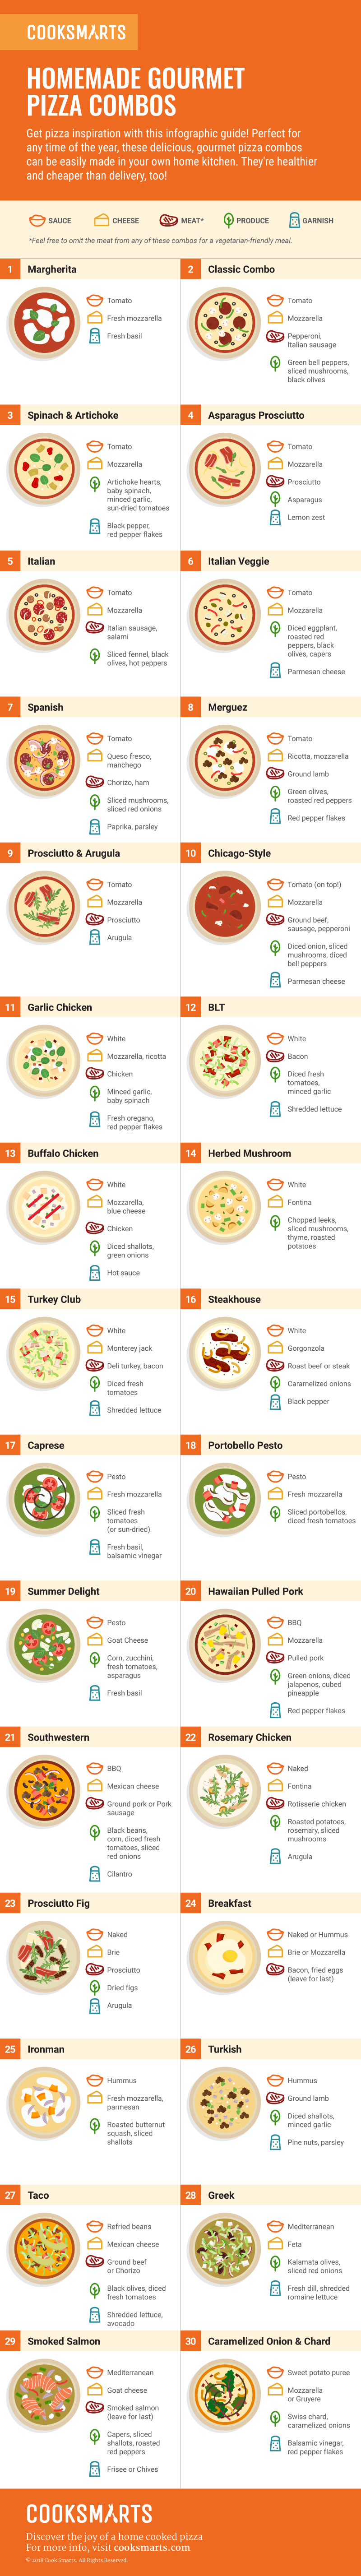 Homemade Gourmet Pizza Combos [Infographic] | Cook Smarts